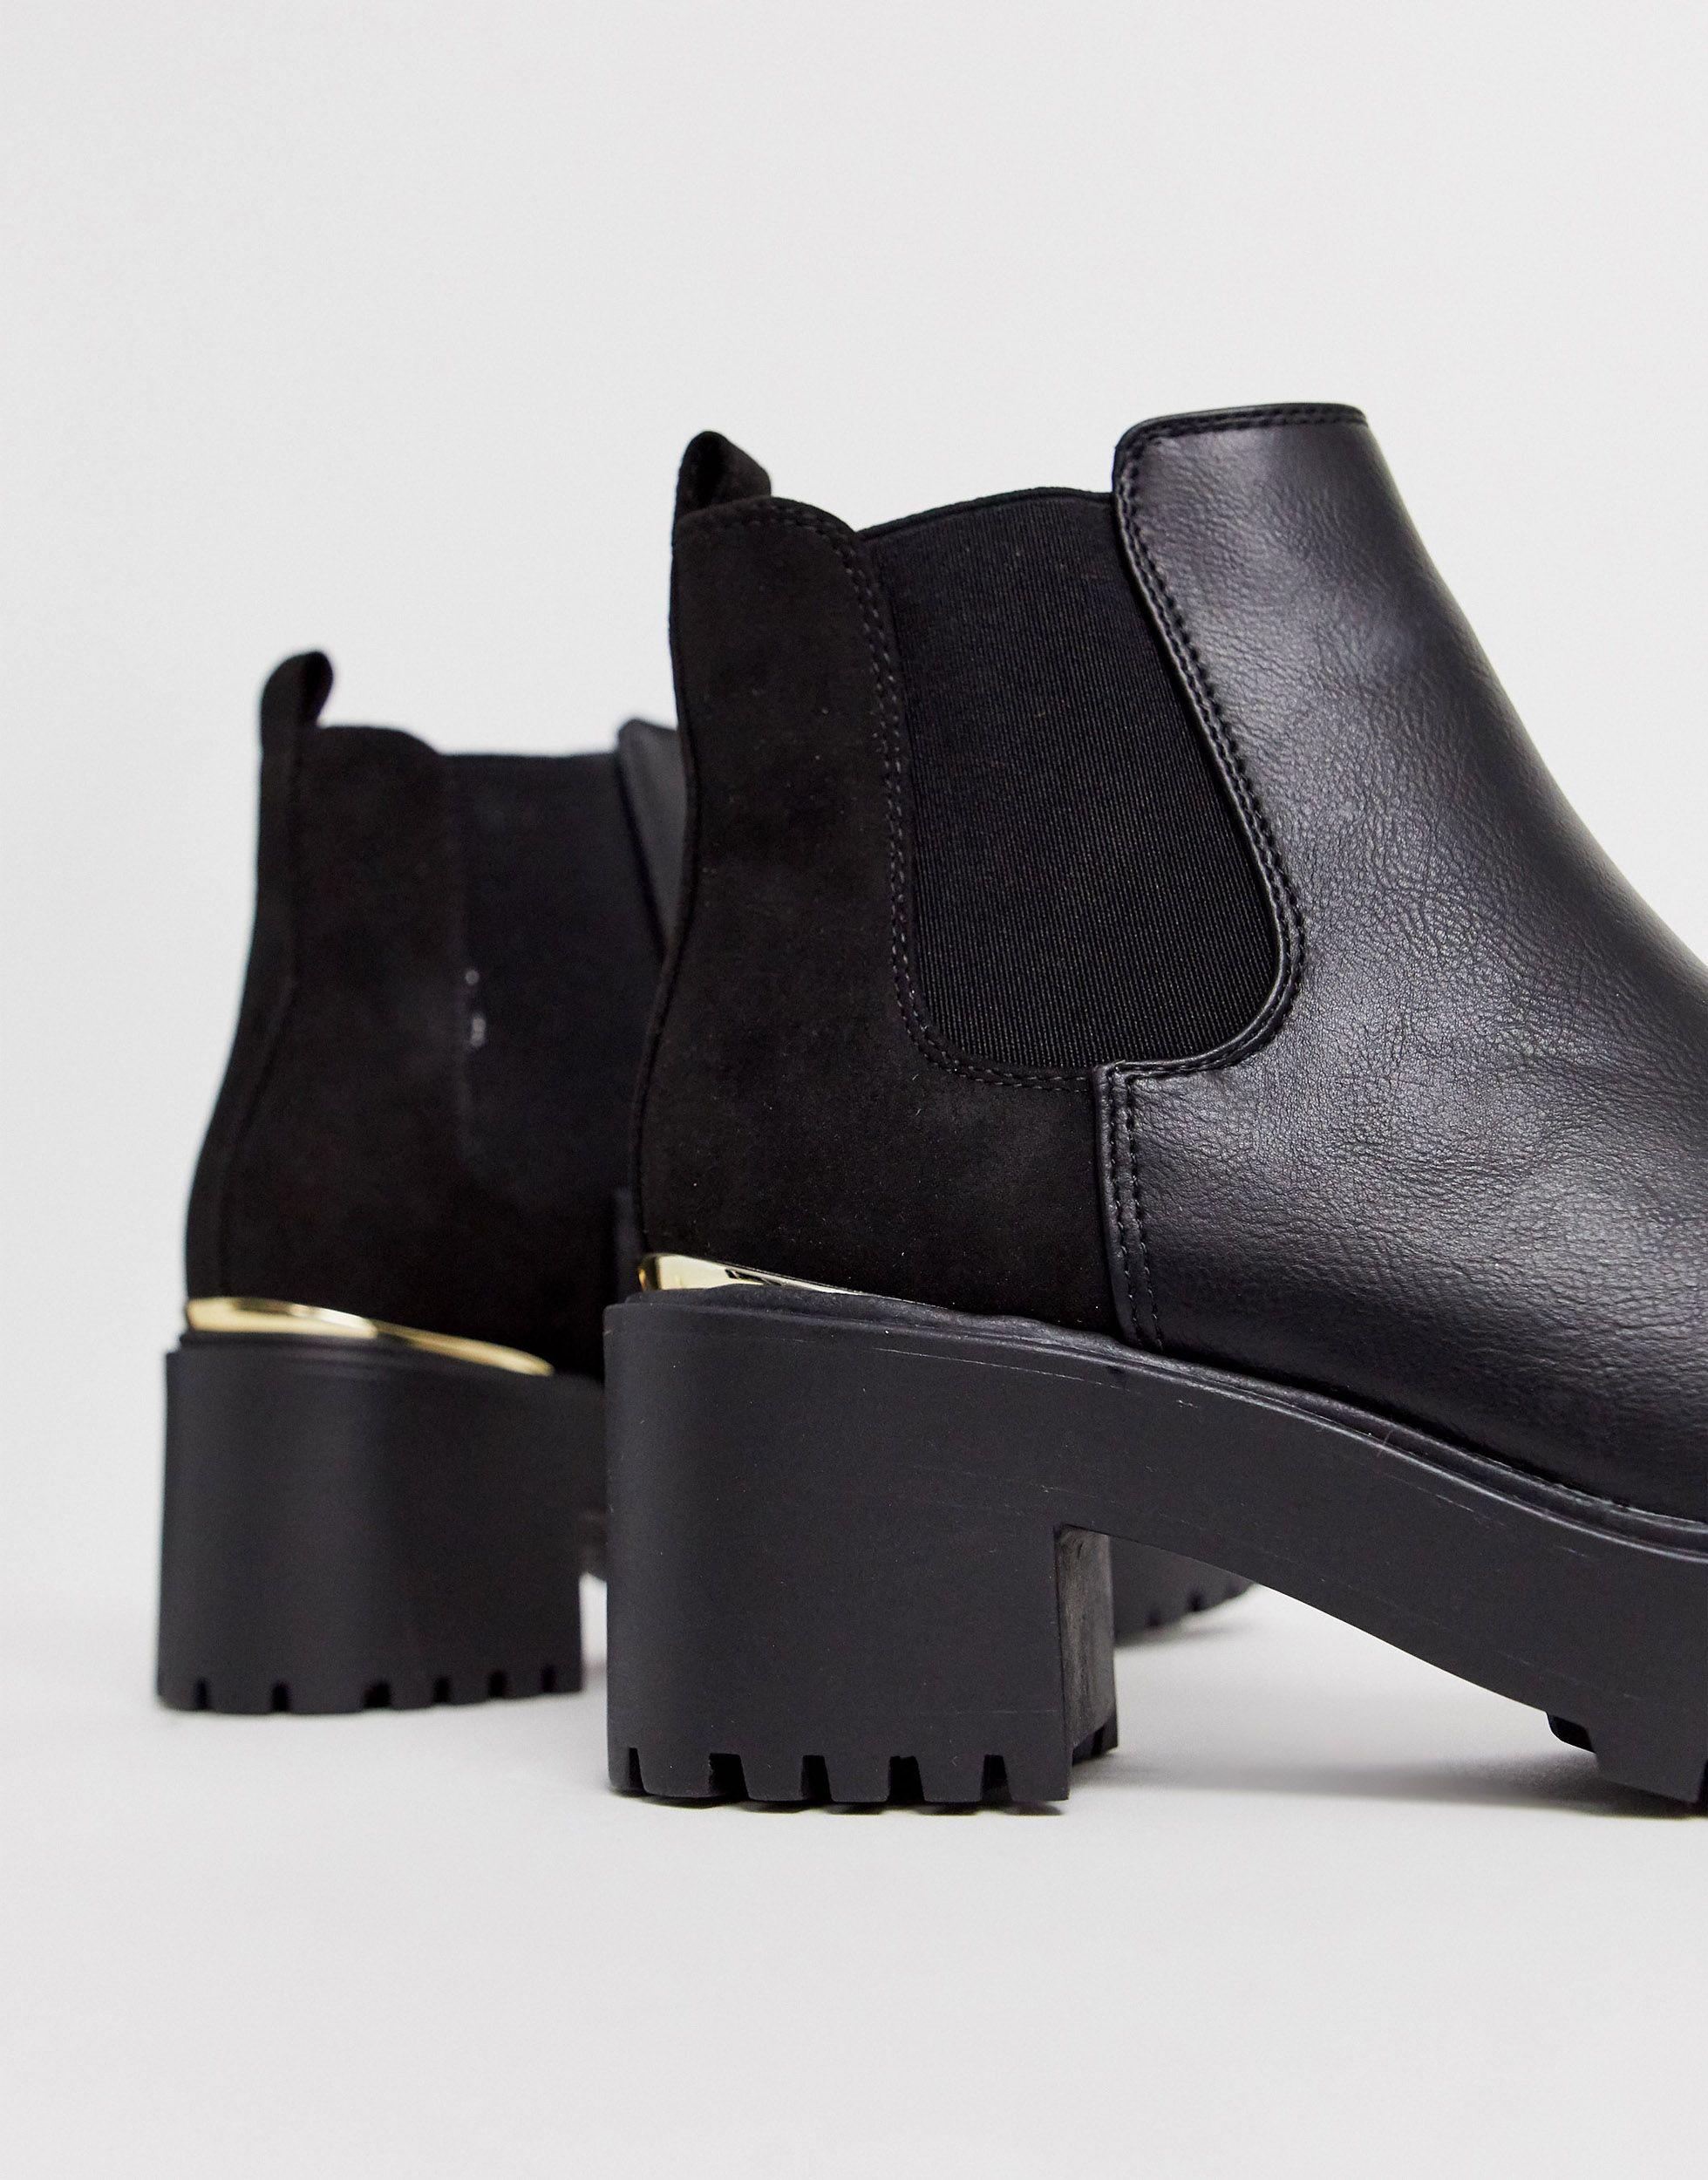 New Look Metal Detail Chunky Heeled Boots in Black | Lyst